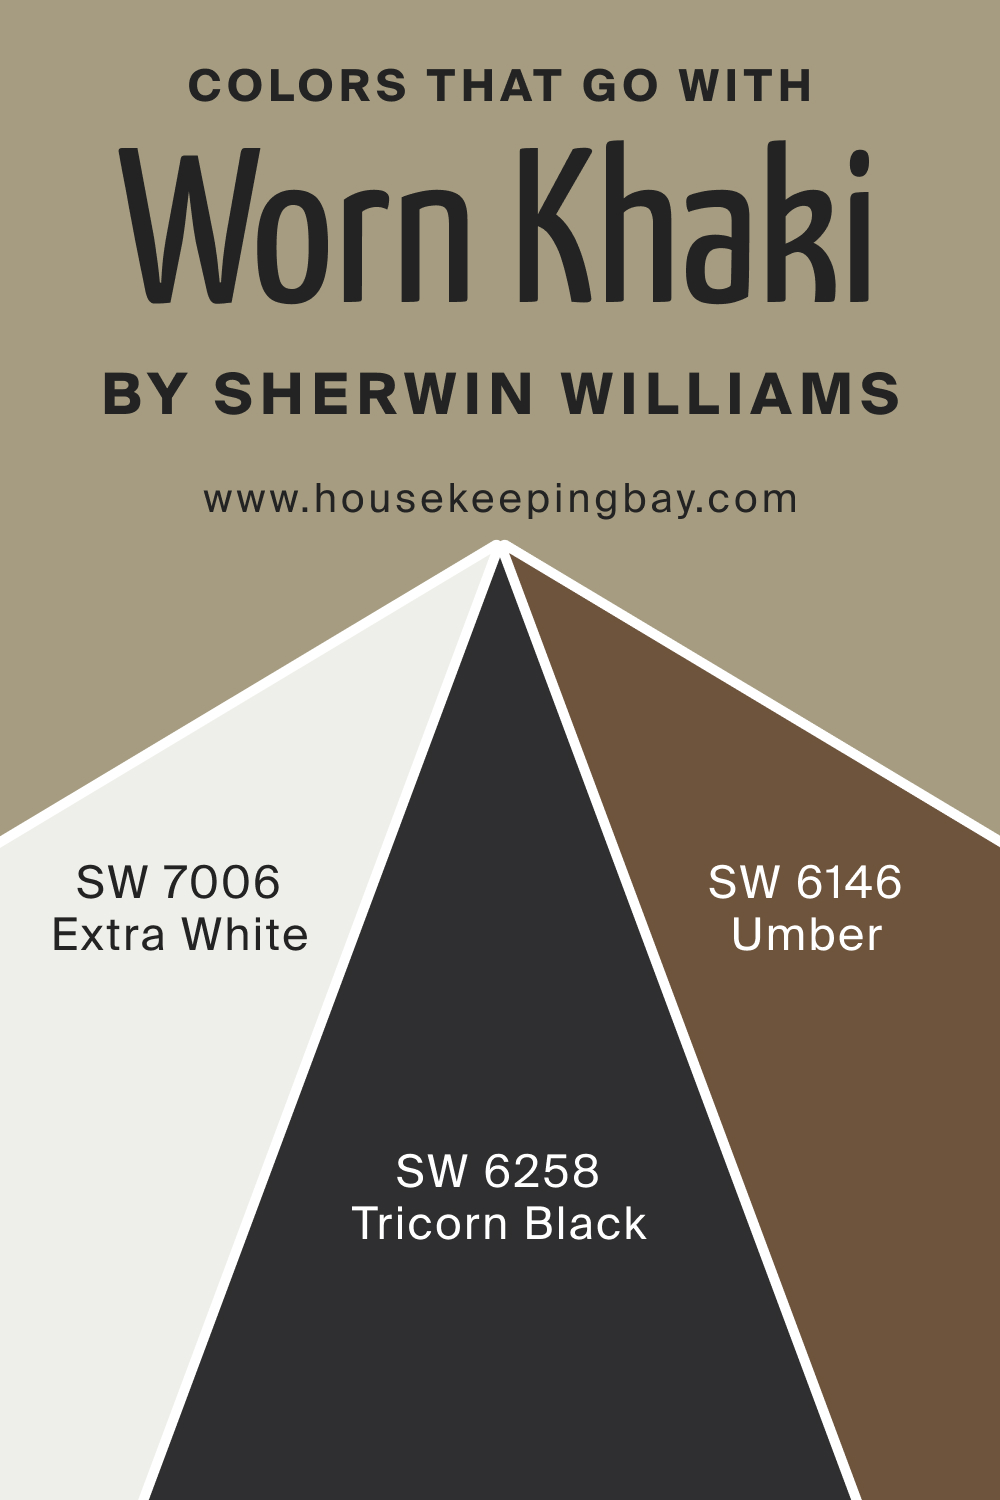 Colors that goes with SW 9527 Worn Khaki by Sherwin Williams